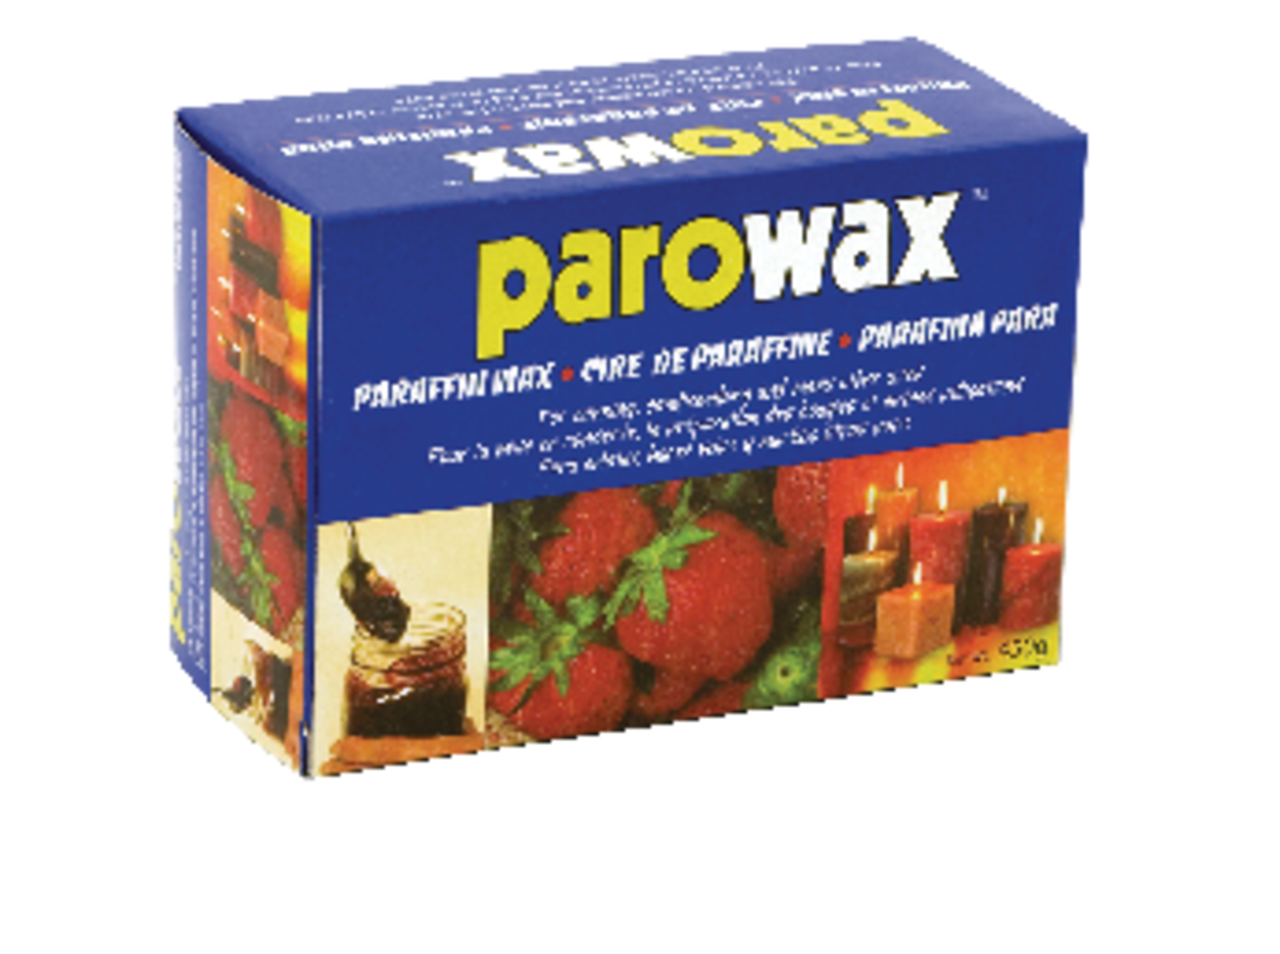 Paraffin Wax for Candle Making, Canning, & More